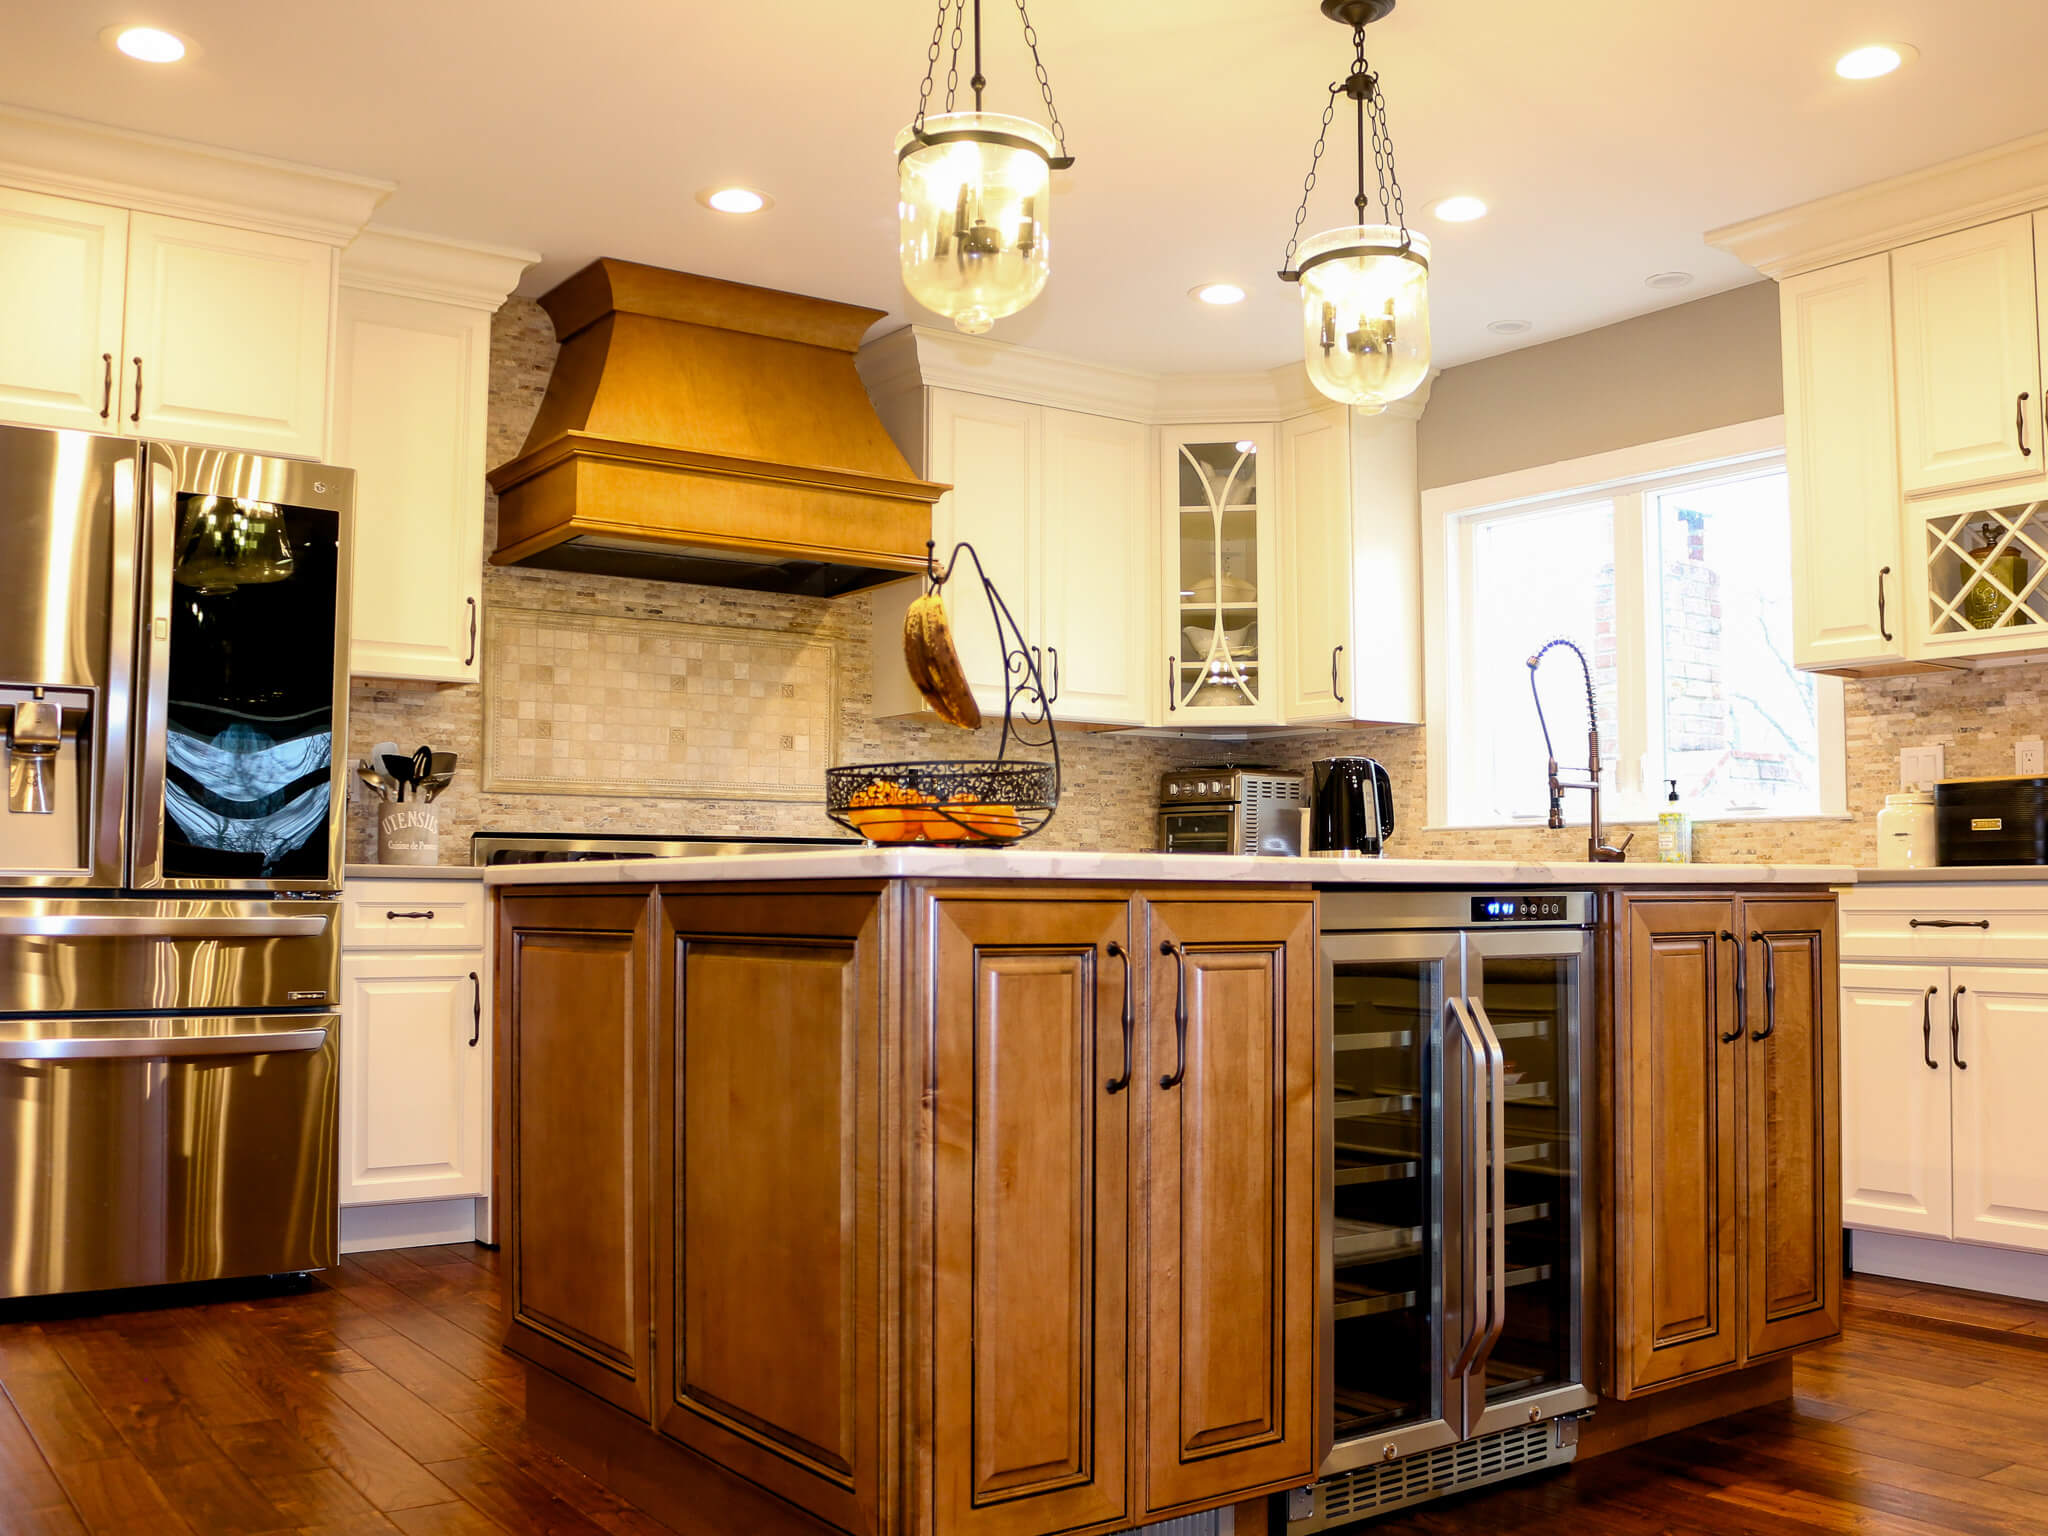 Top kitchen remodeling with wood cabinetry